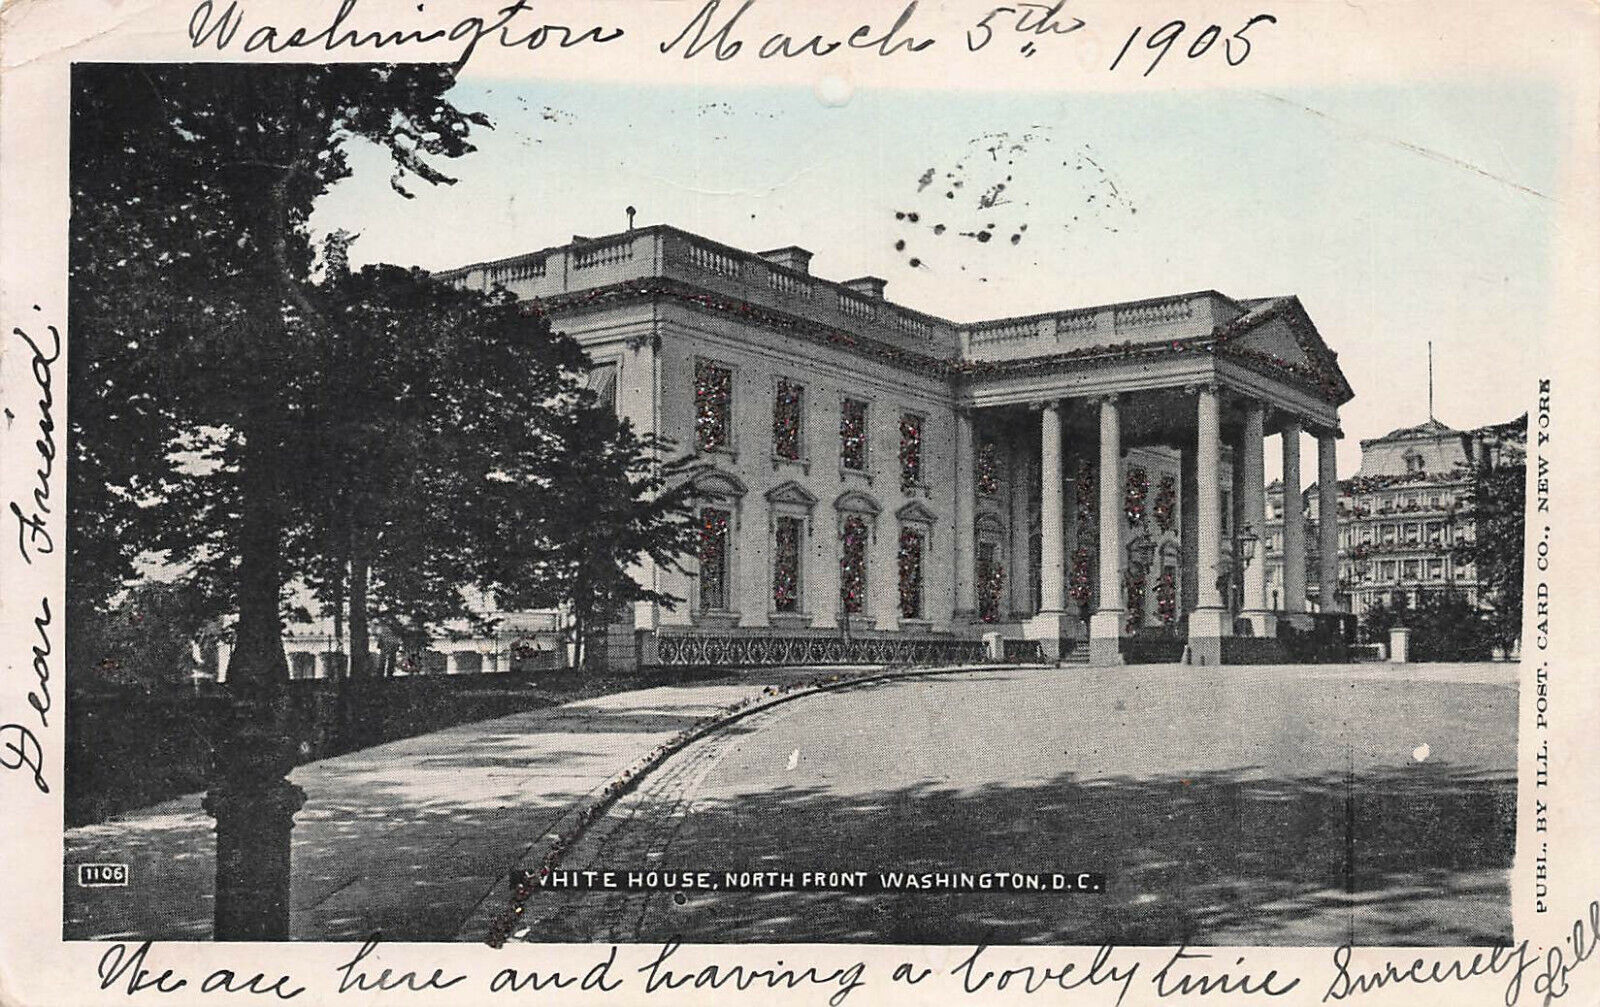 White House, North Front, Washington, D.C., Early Postcard, Used in 1905